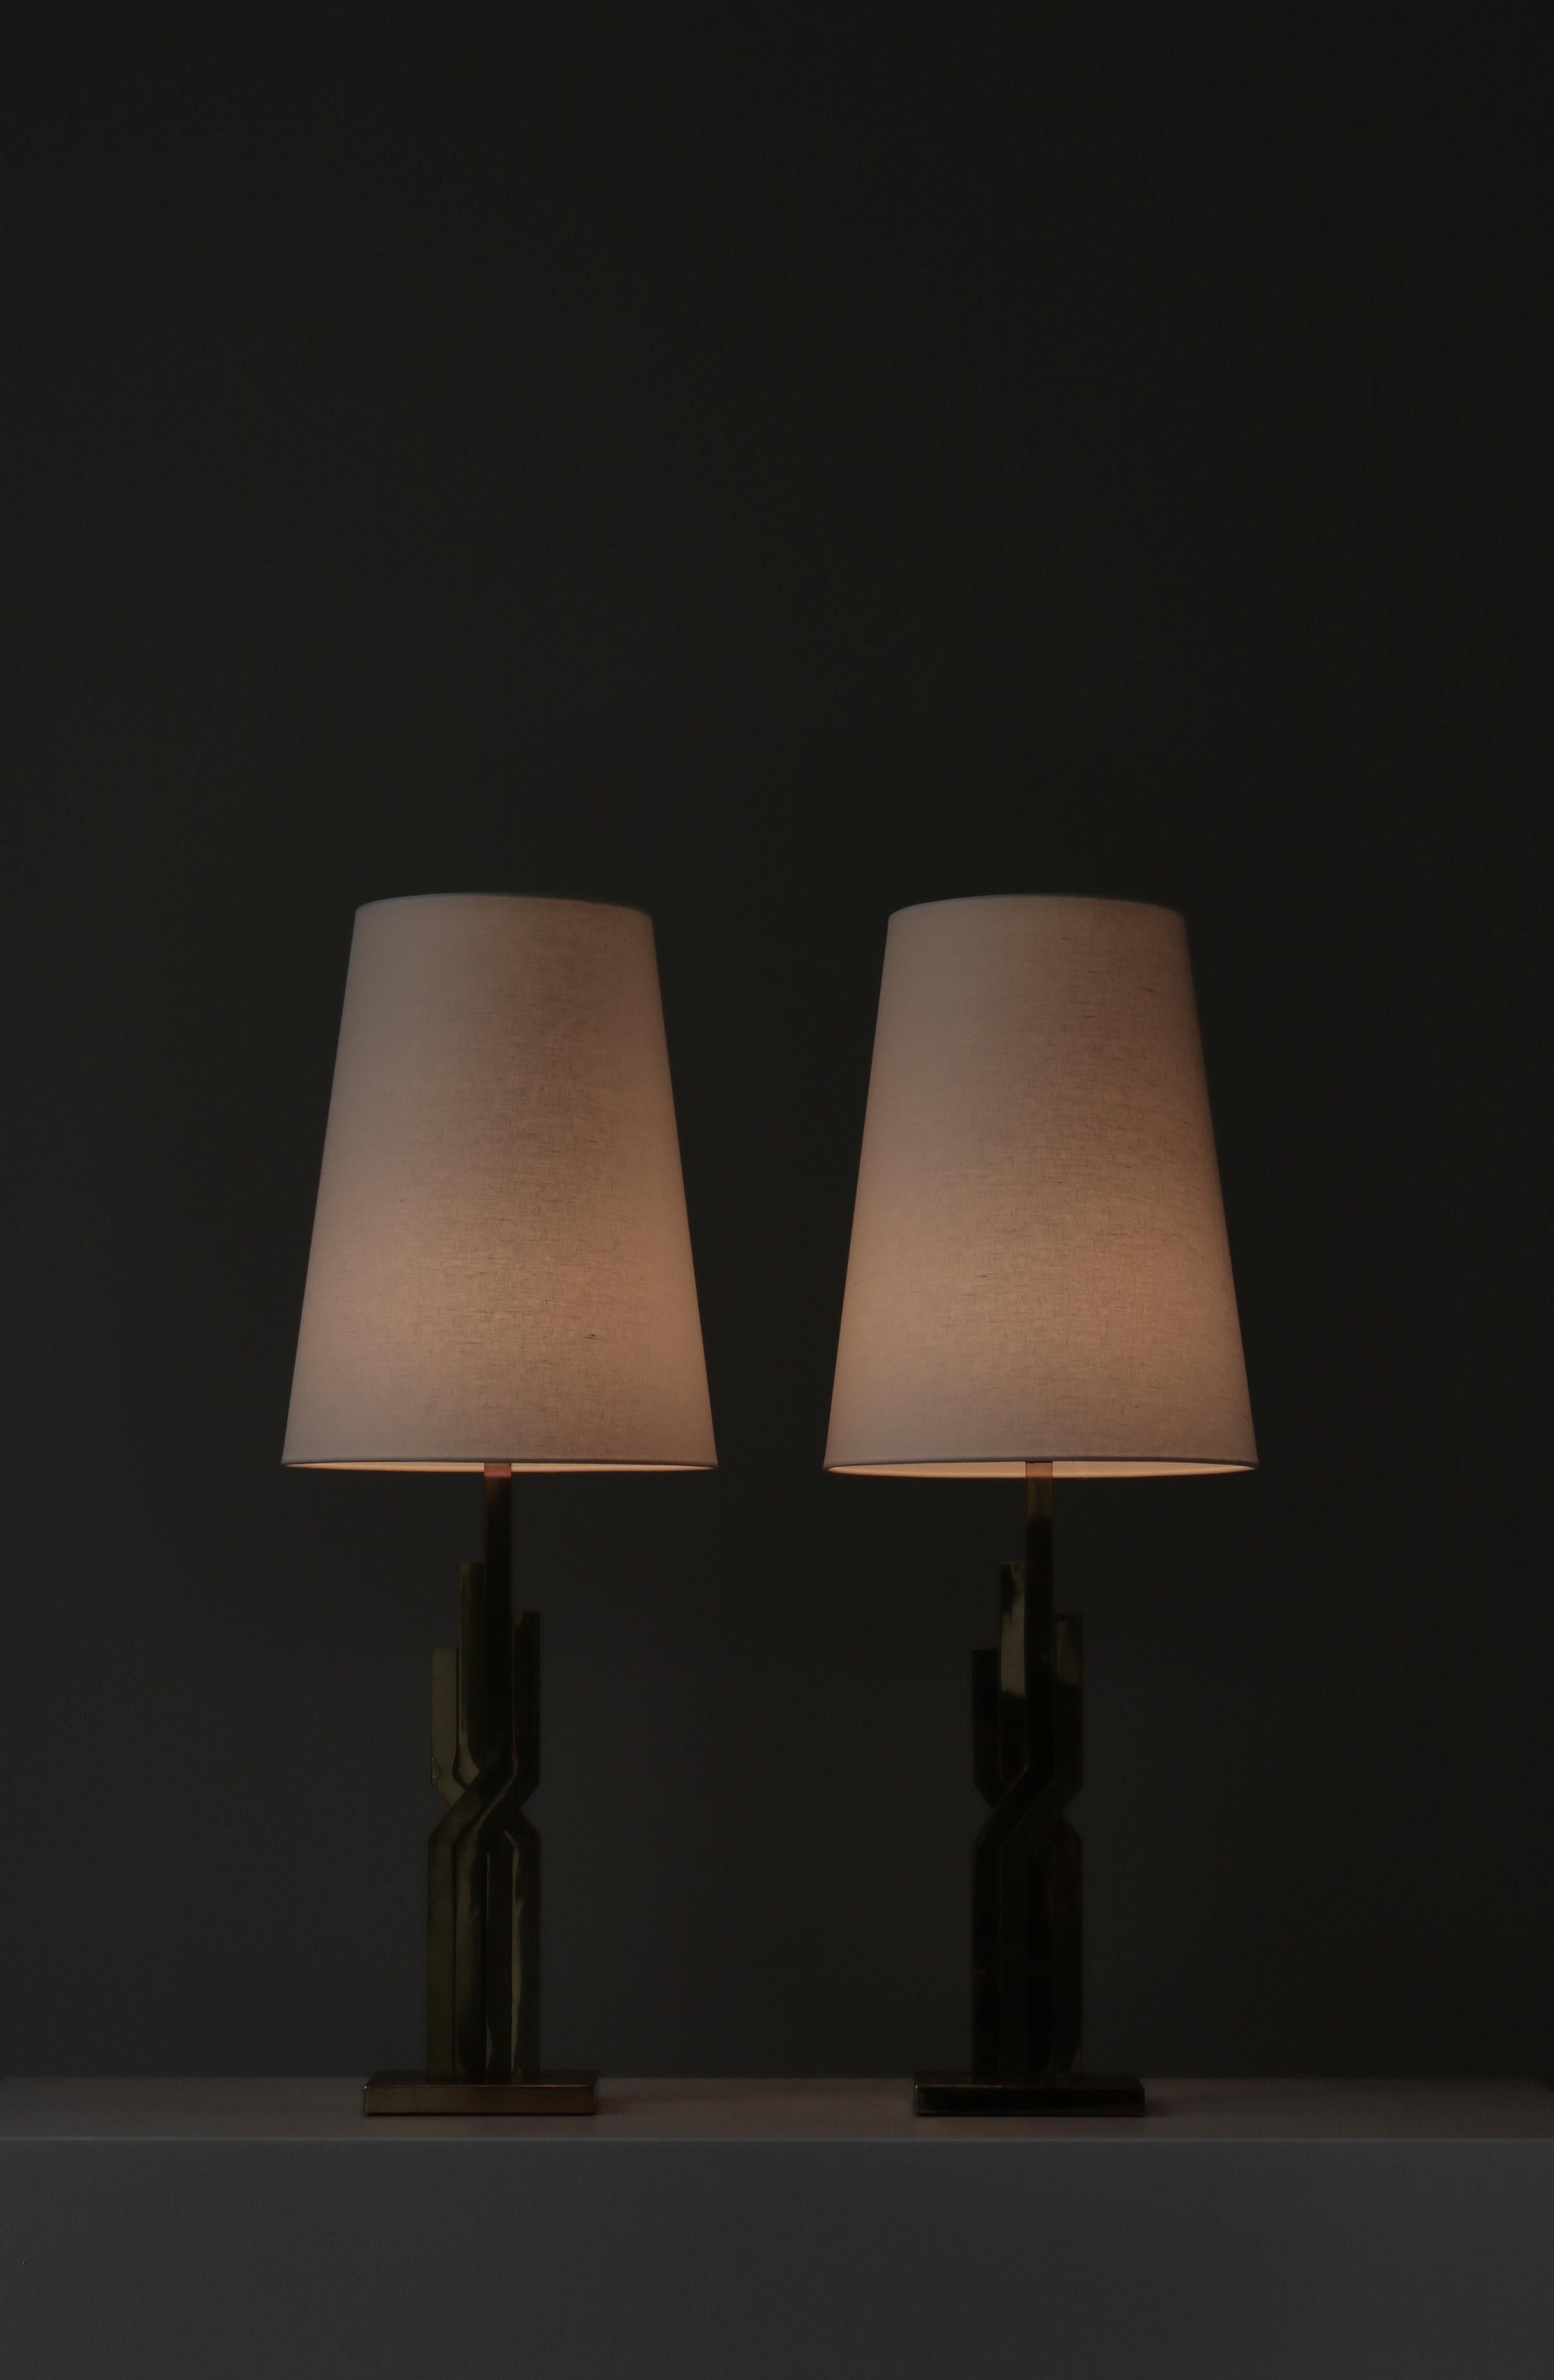 Large Danish Modern Table Lamps in Brass by Svend Aage Holm-Sørensen, 1960s For Sale 8